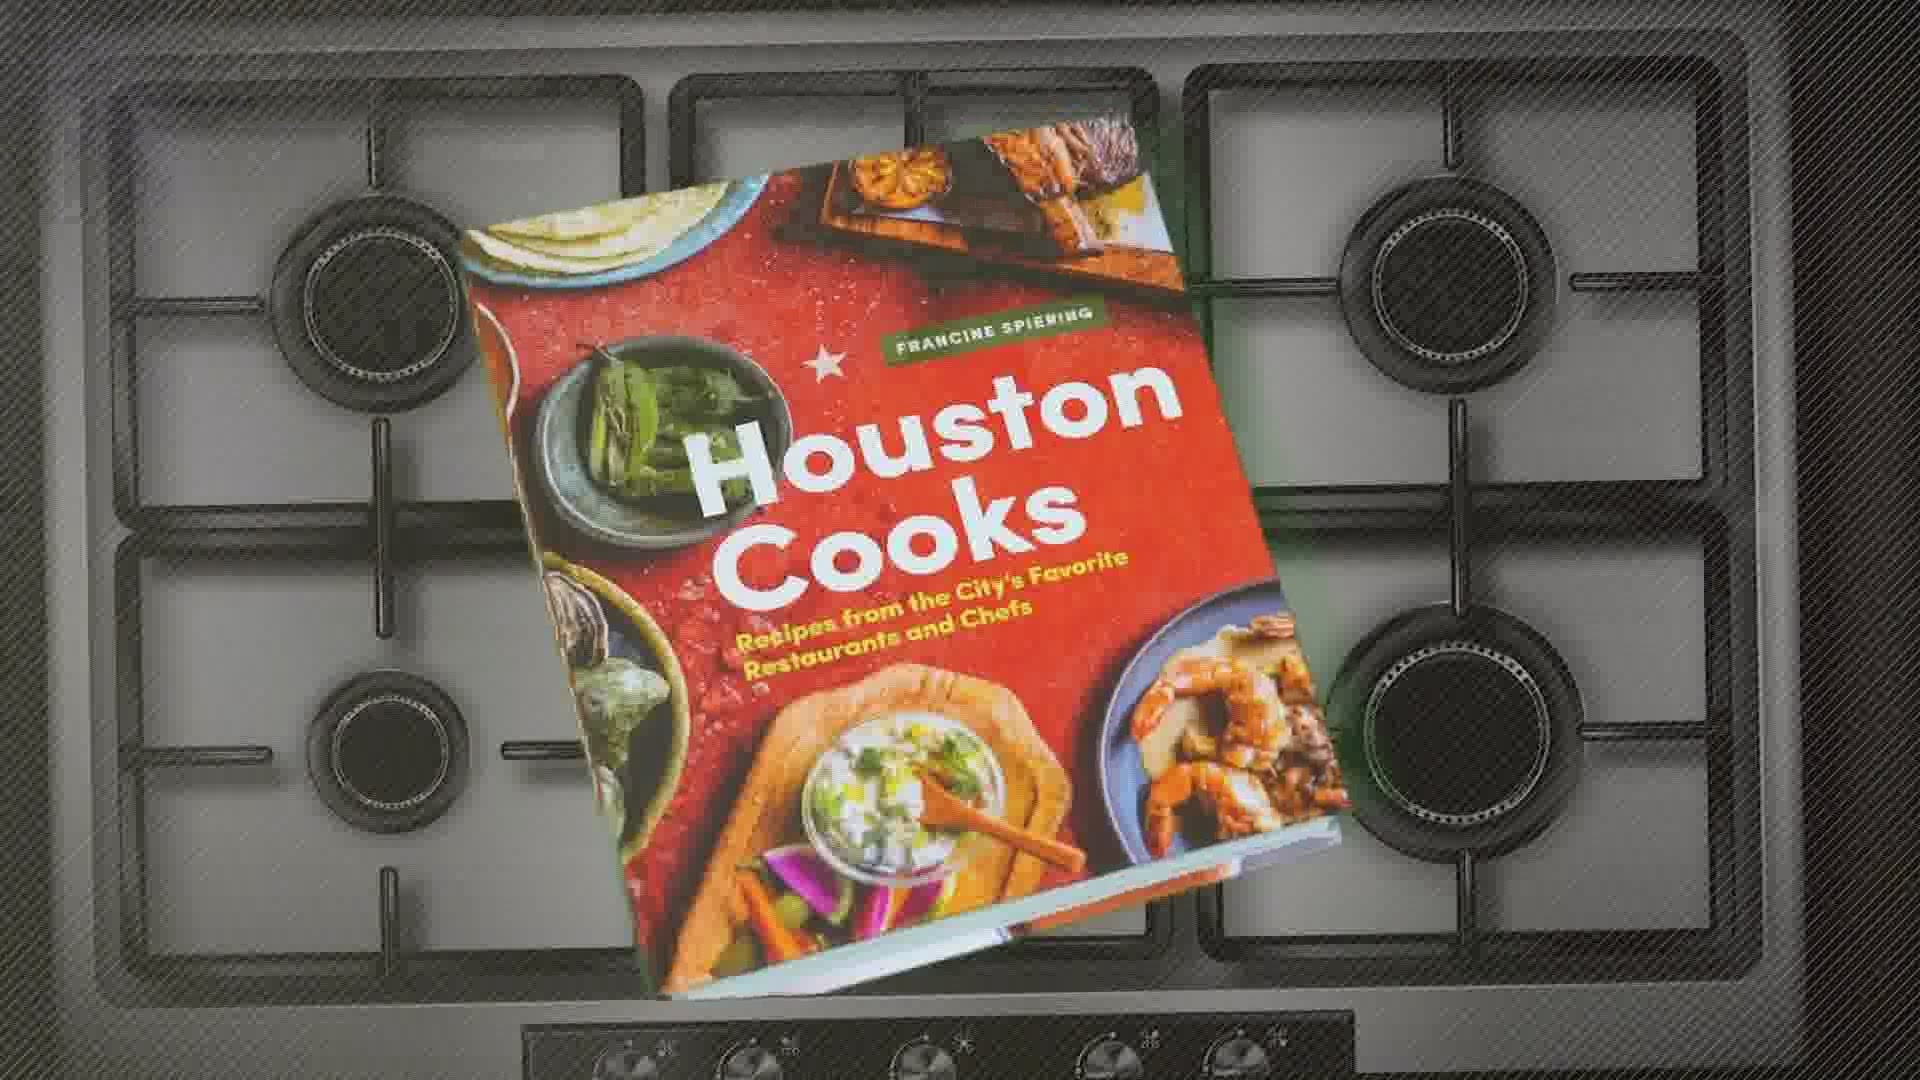 Cane's dipping sauce. Wendy's chili. Houston cookbook shows you how to make recipes from your favorite restaurants.